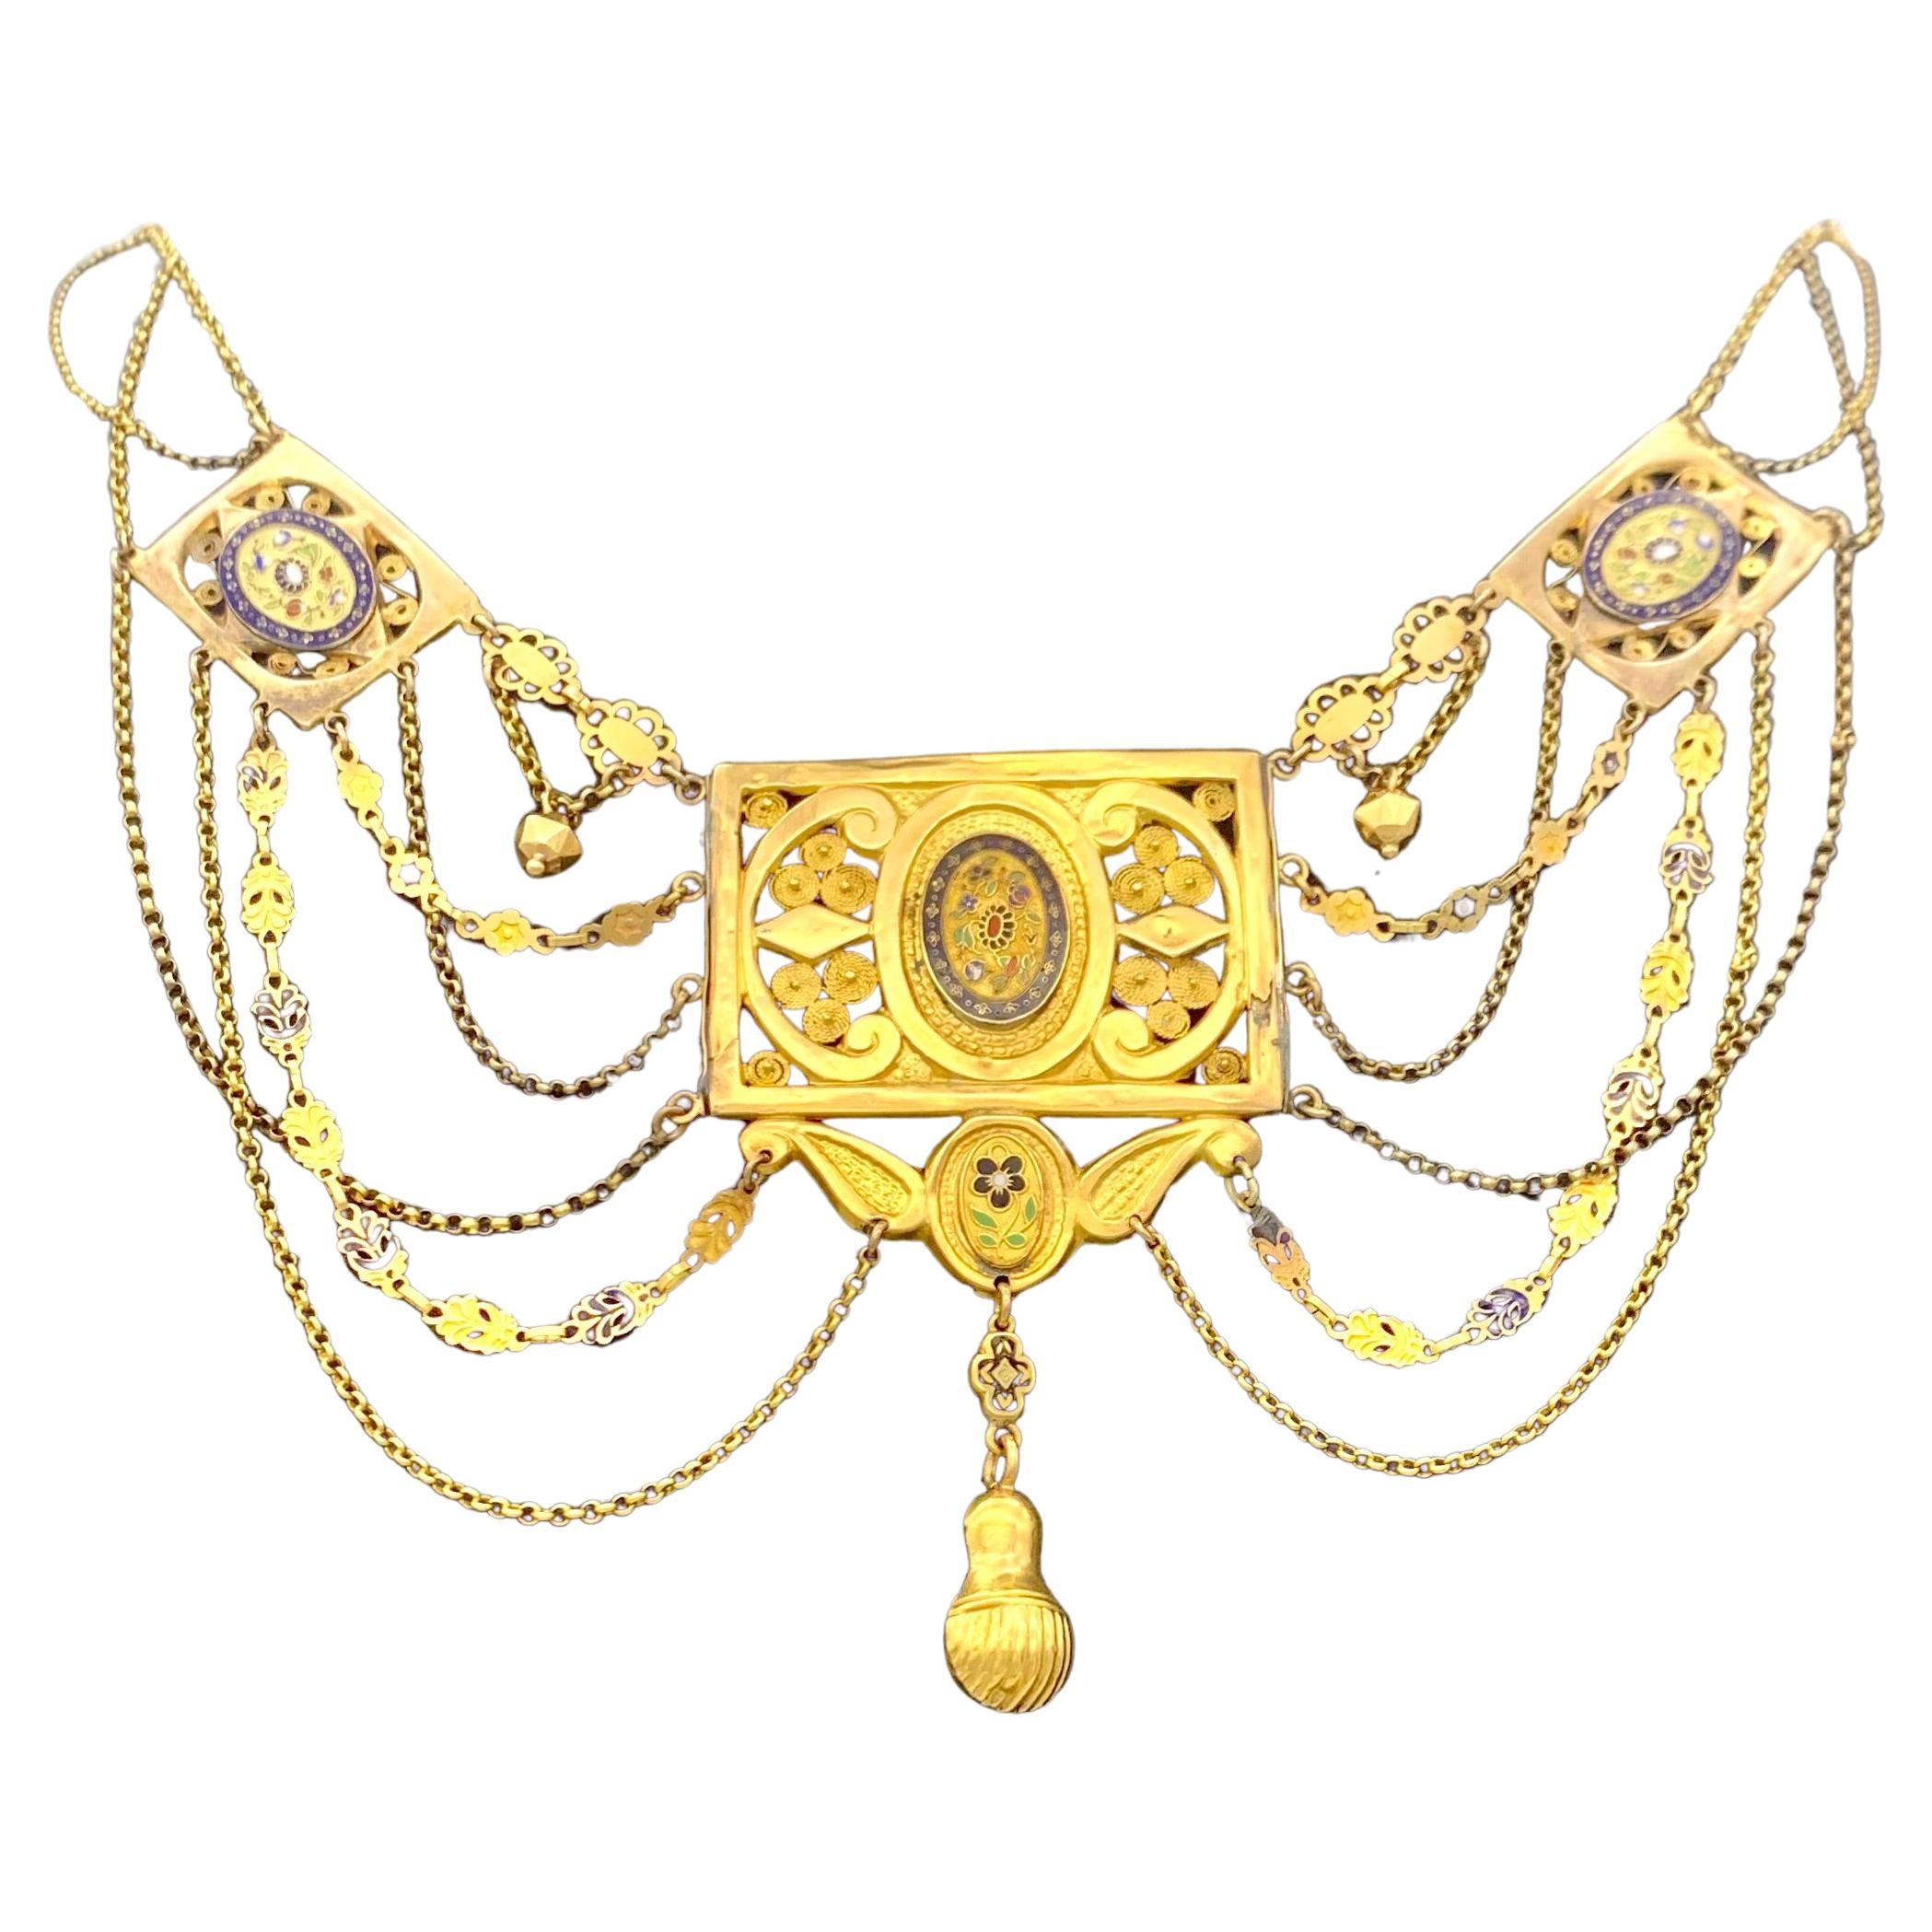 This rare necklace was handcrafted out of 18 karat gold in 1810 ca. It was worn by a bride and the iconographic language is full of sentimental conotations. The central rectangular element is connected to the two outer rectangular elements by a